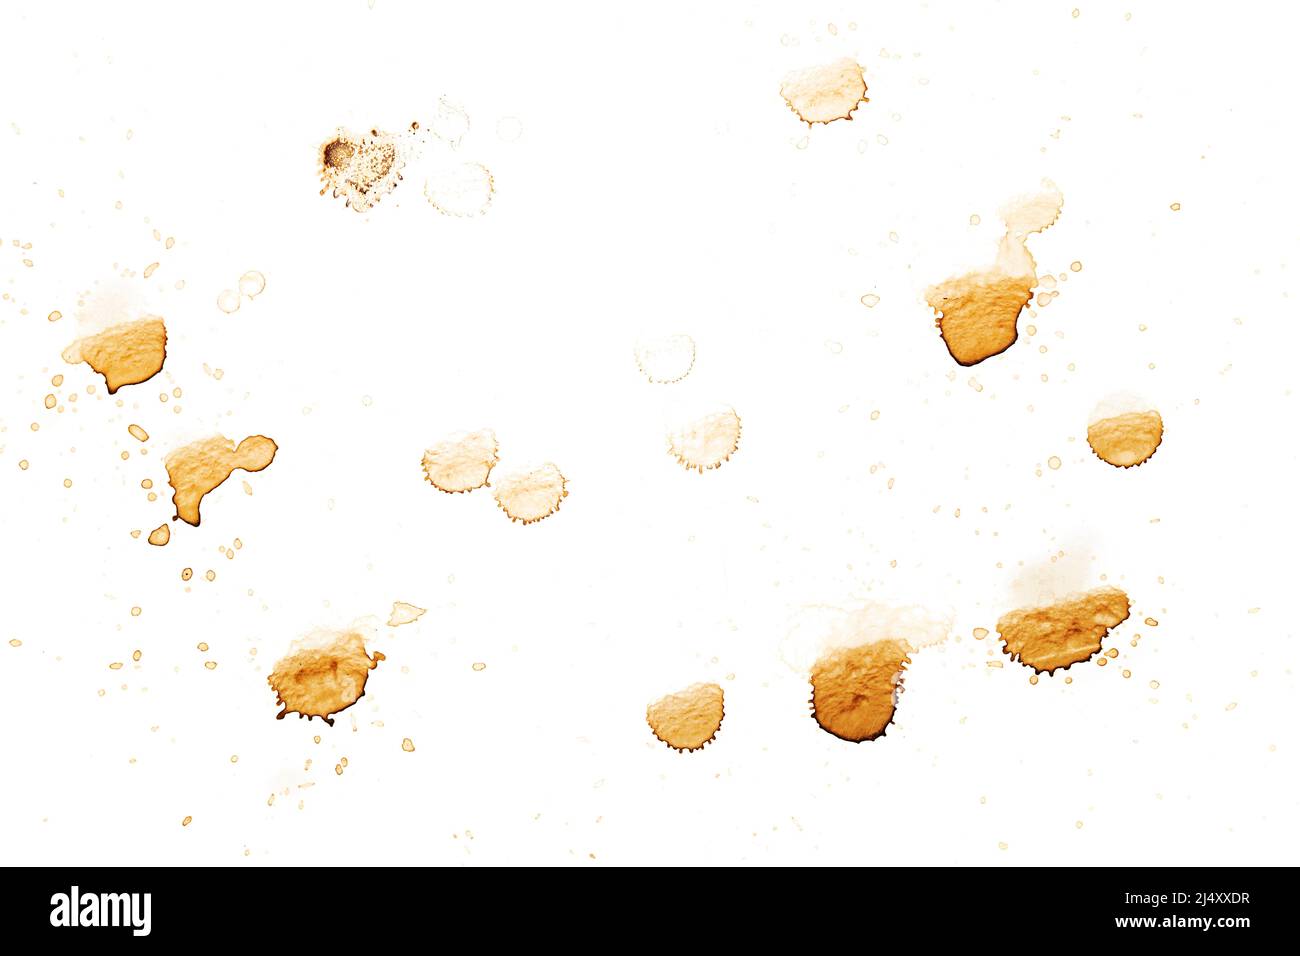 Coffee stains and coffee cup marks splatters design pack Stock Photo